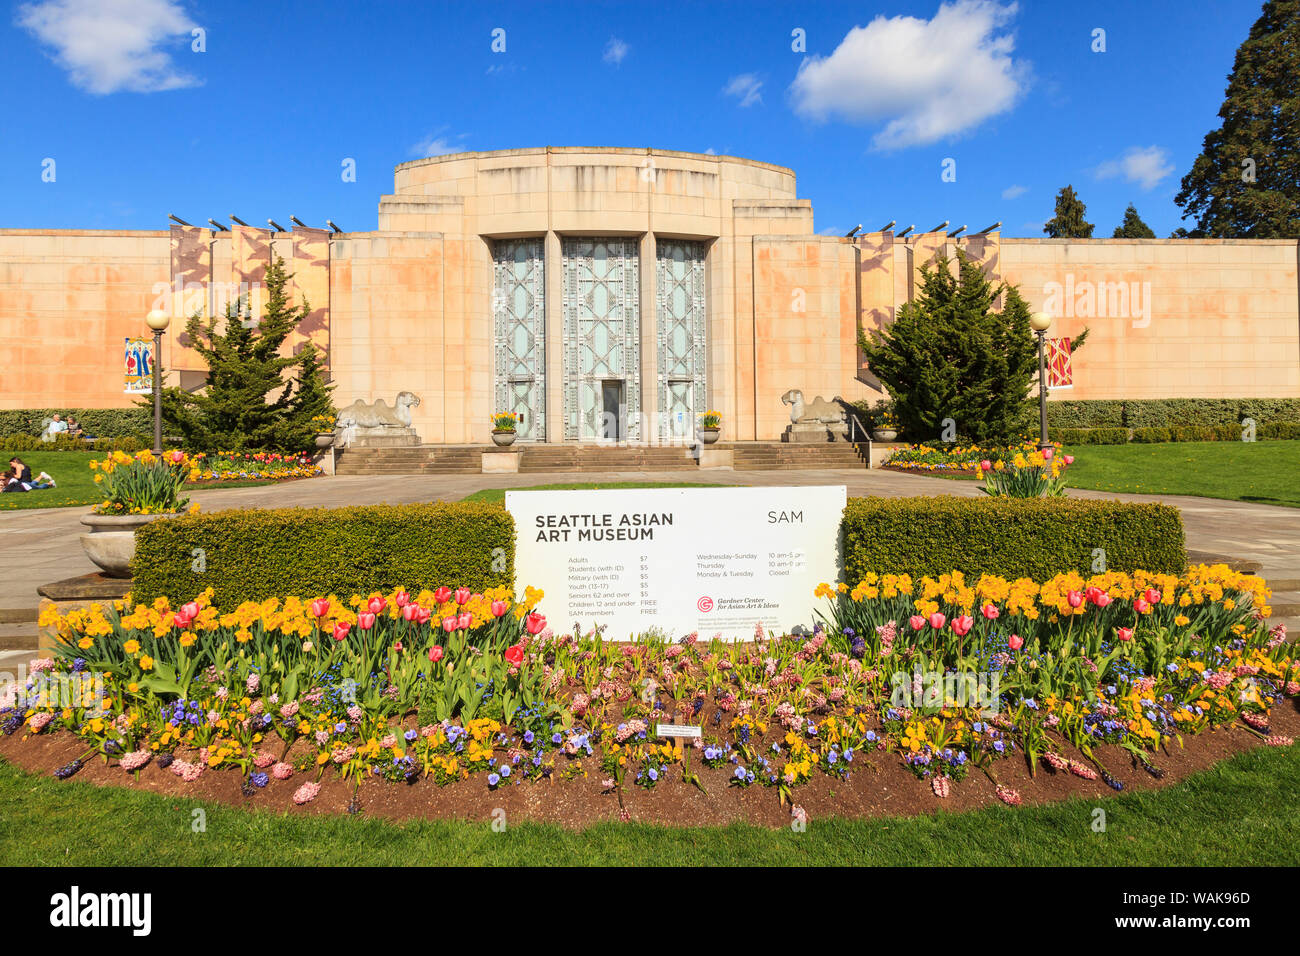 Seattle Asian Art Museum, Volunteer Park, Capitol Hill area of Seattle, USA. (Editorial Use Only) Stock Photo